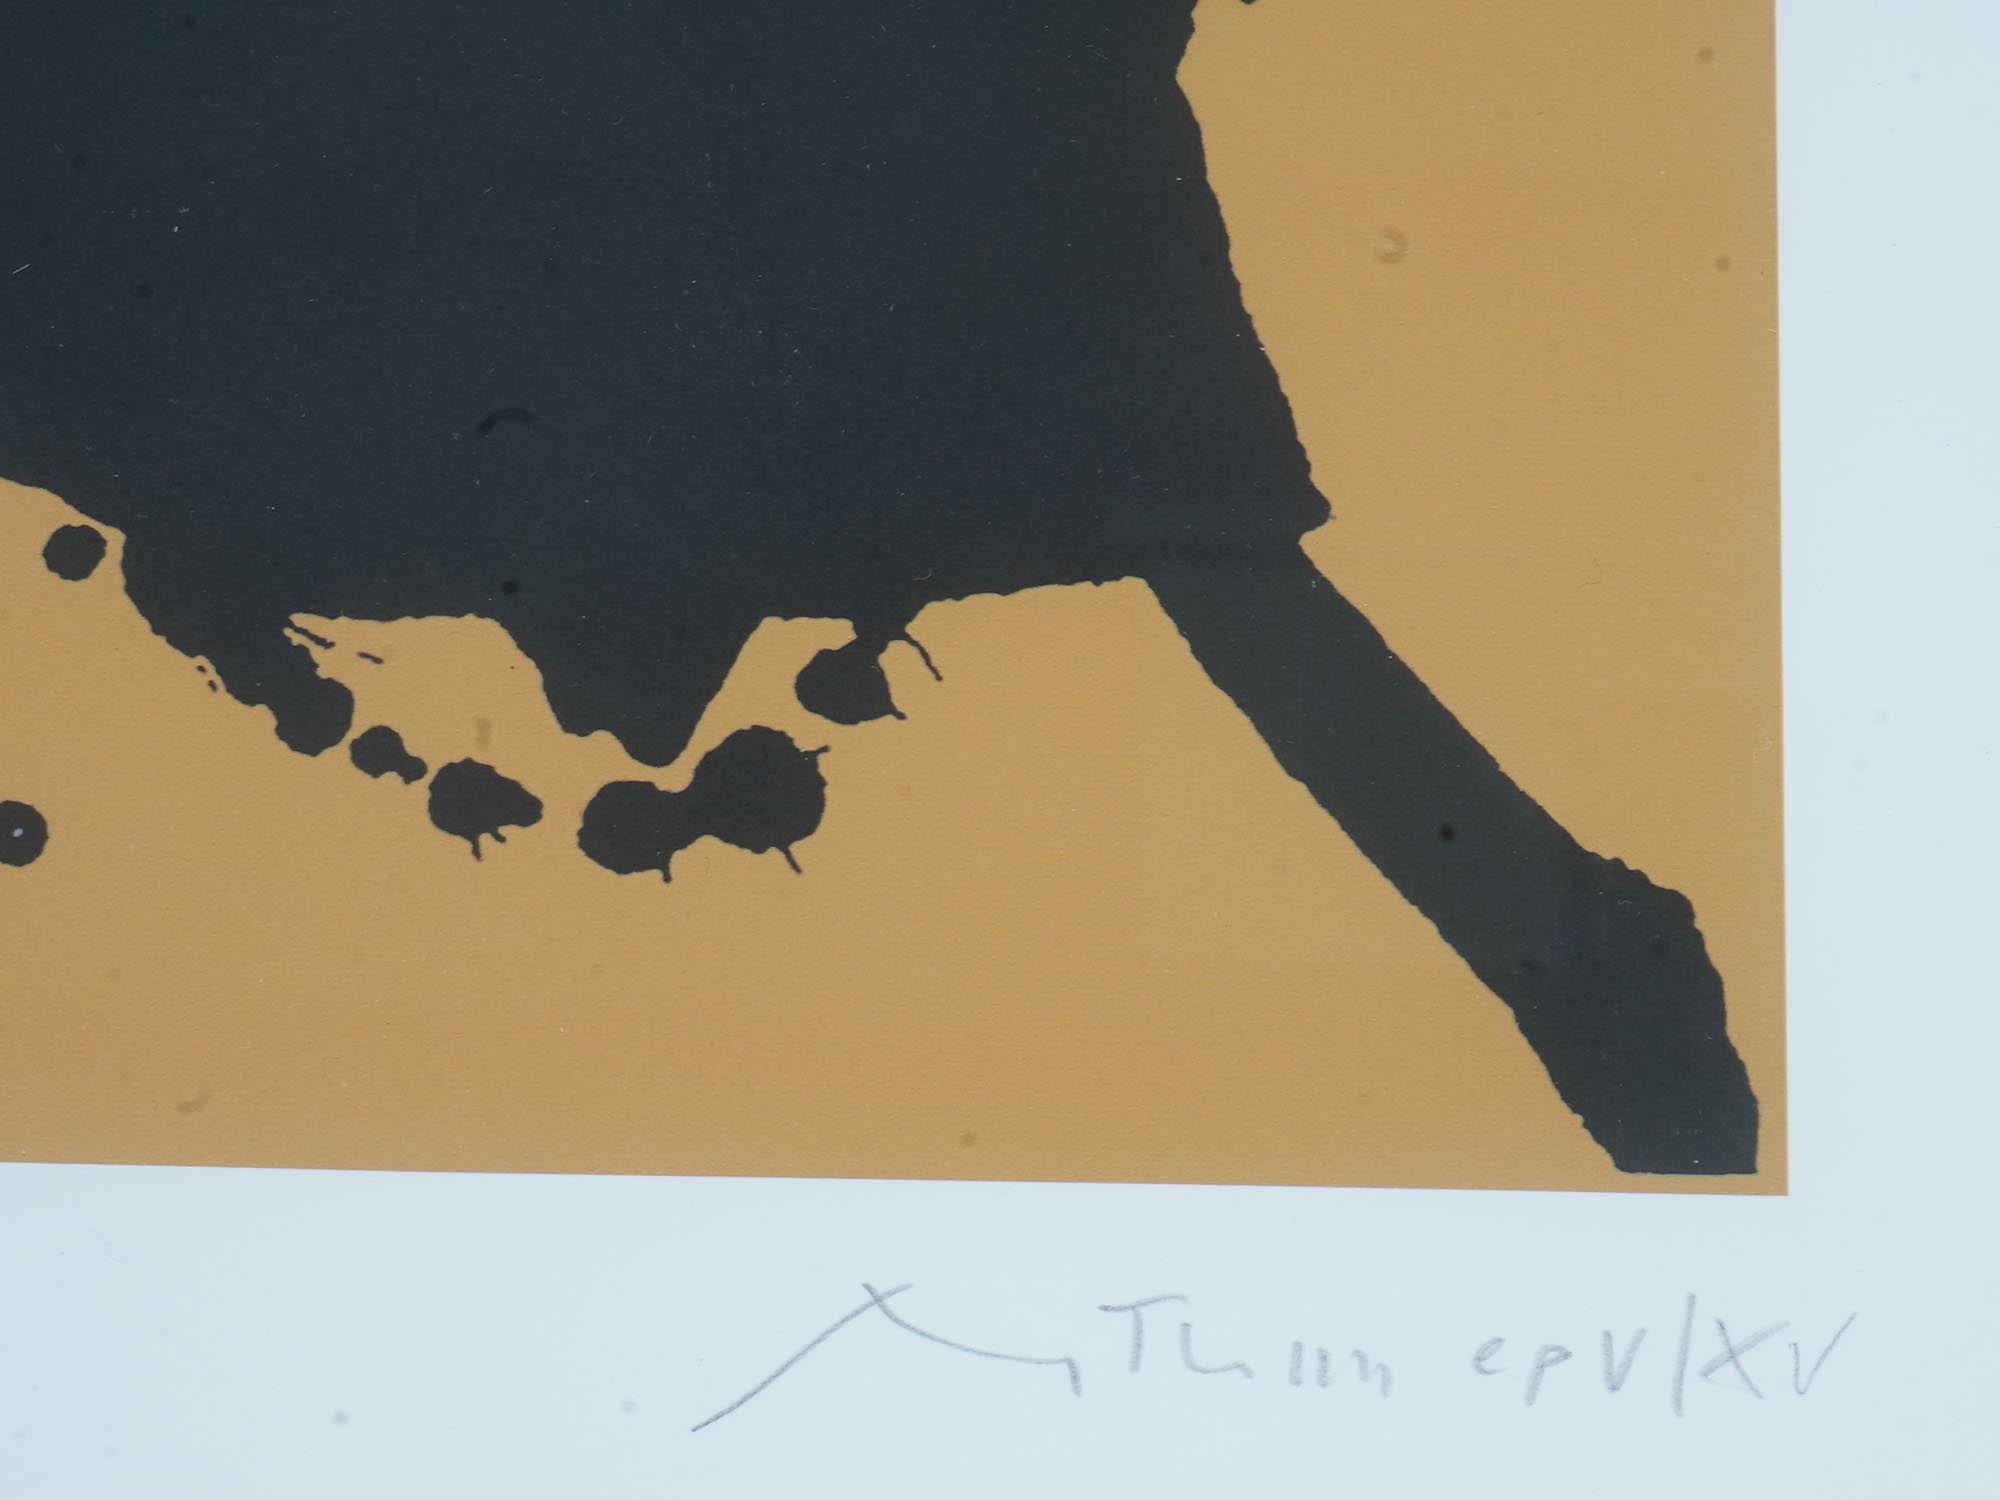 LTD AMERICAN ETCHING BY ROBERT MOTHERWELL SIGNED PIC-2